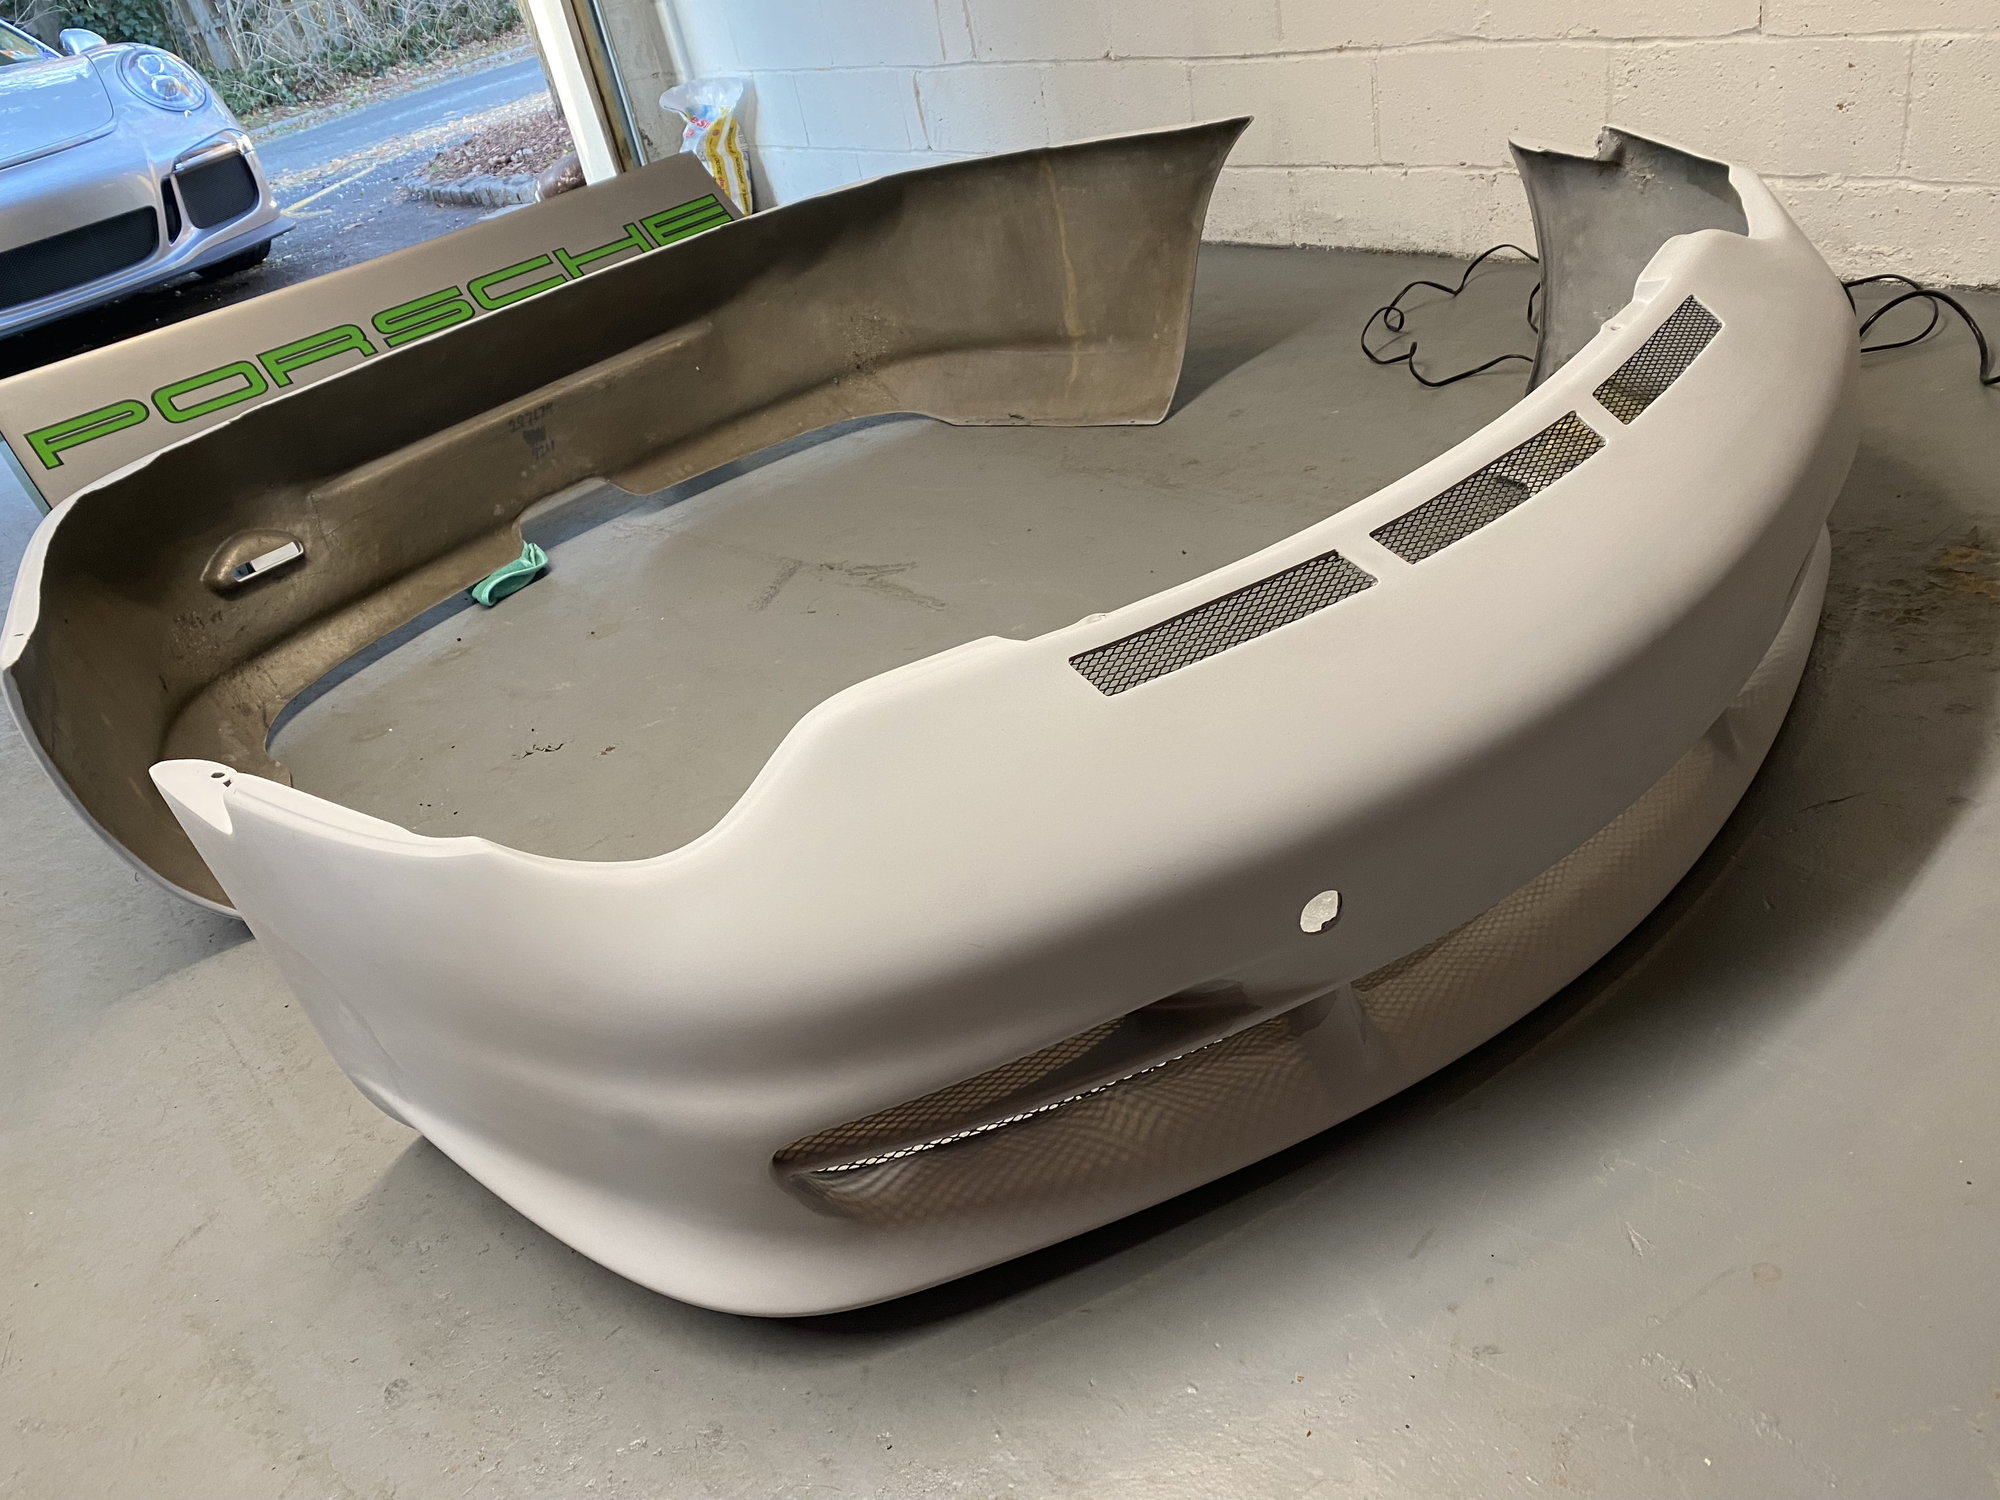 Exterior Body Parts - Porsche 996 Cup Car body parts (Getty) - Used - Cranford, NJ 7016, United States